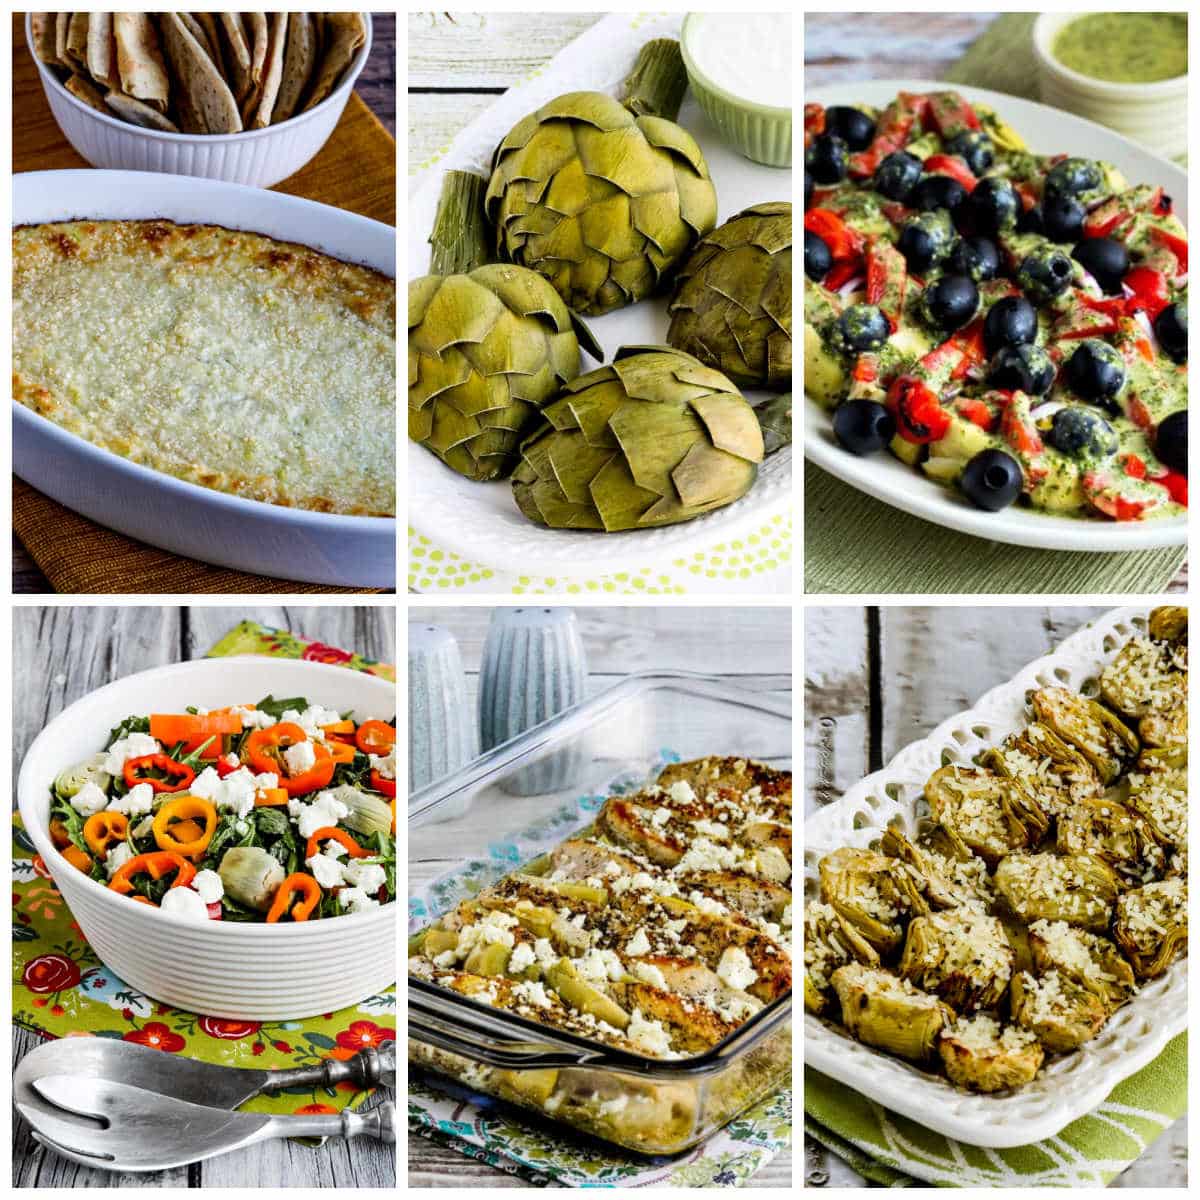 Collage image for Amazing Recipes with Artichokes showing featured recipes.